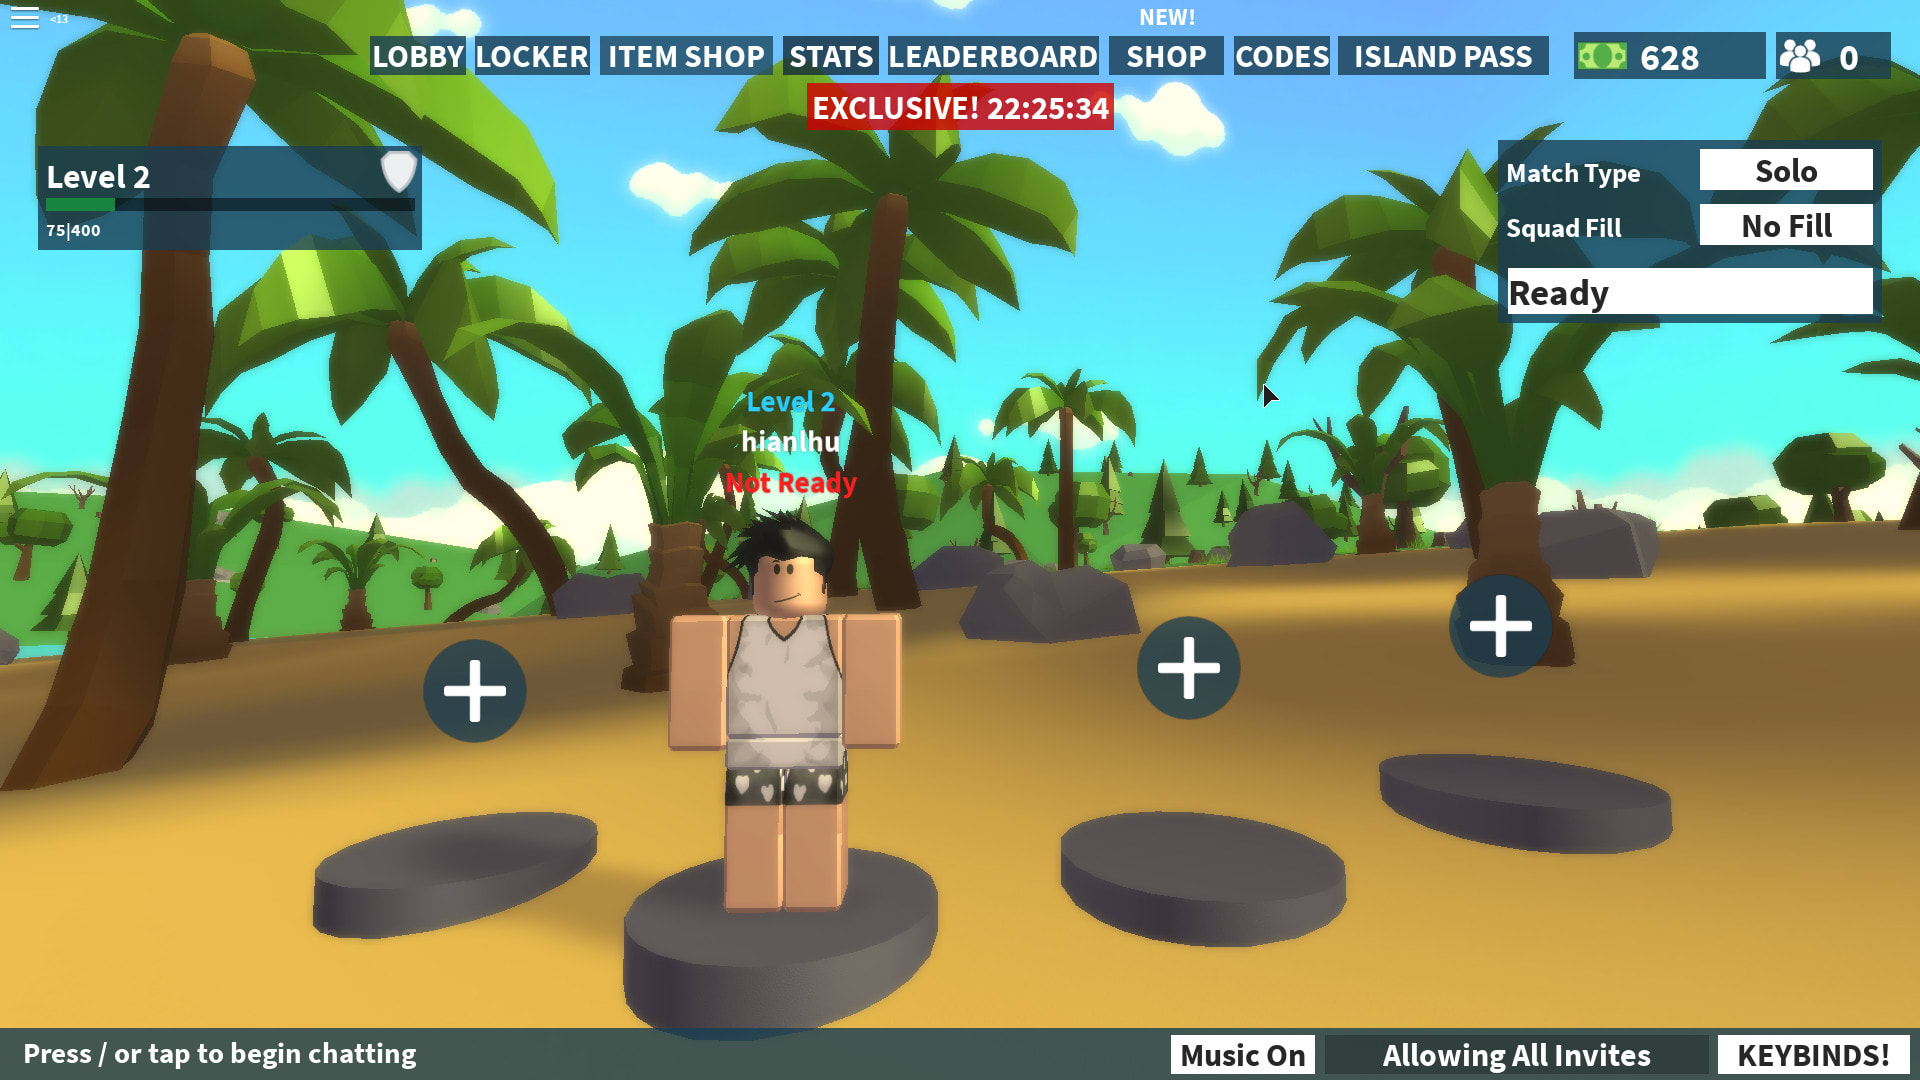 Play Roblox With You About 2 Hour By Justinfirdaus - play roblox with you for 2 hours